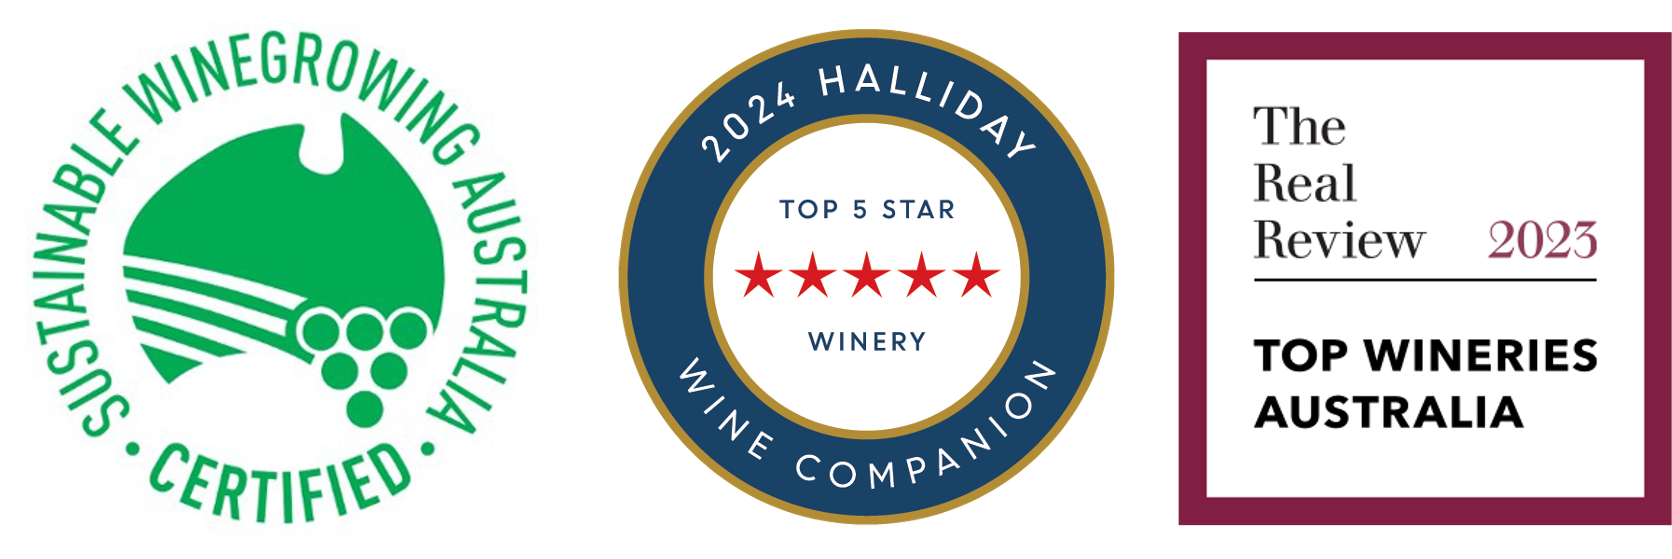 Sustainable winegrowing australia trust mark, five red stars halliday wine companion roundel, top wineries australia by the real review logo